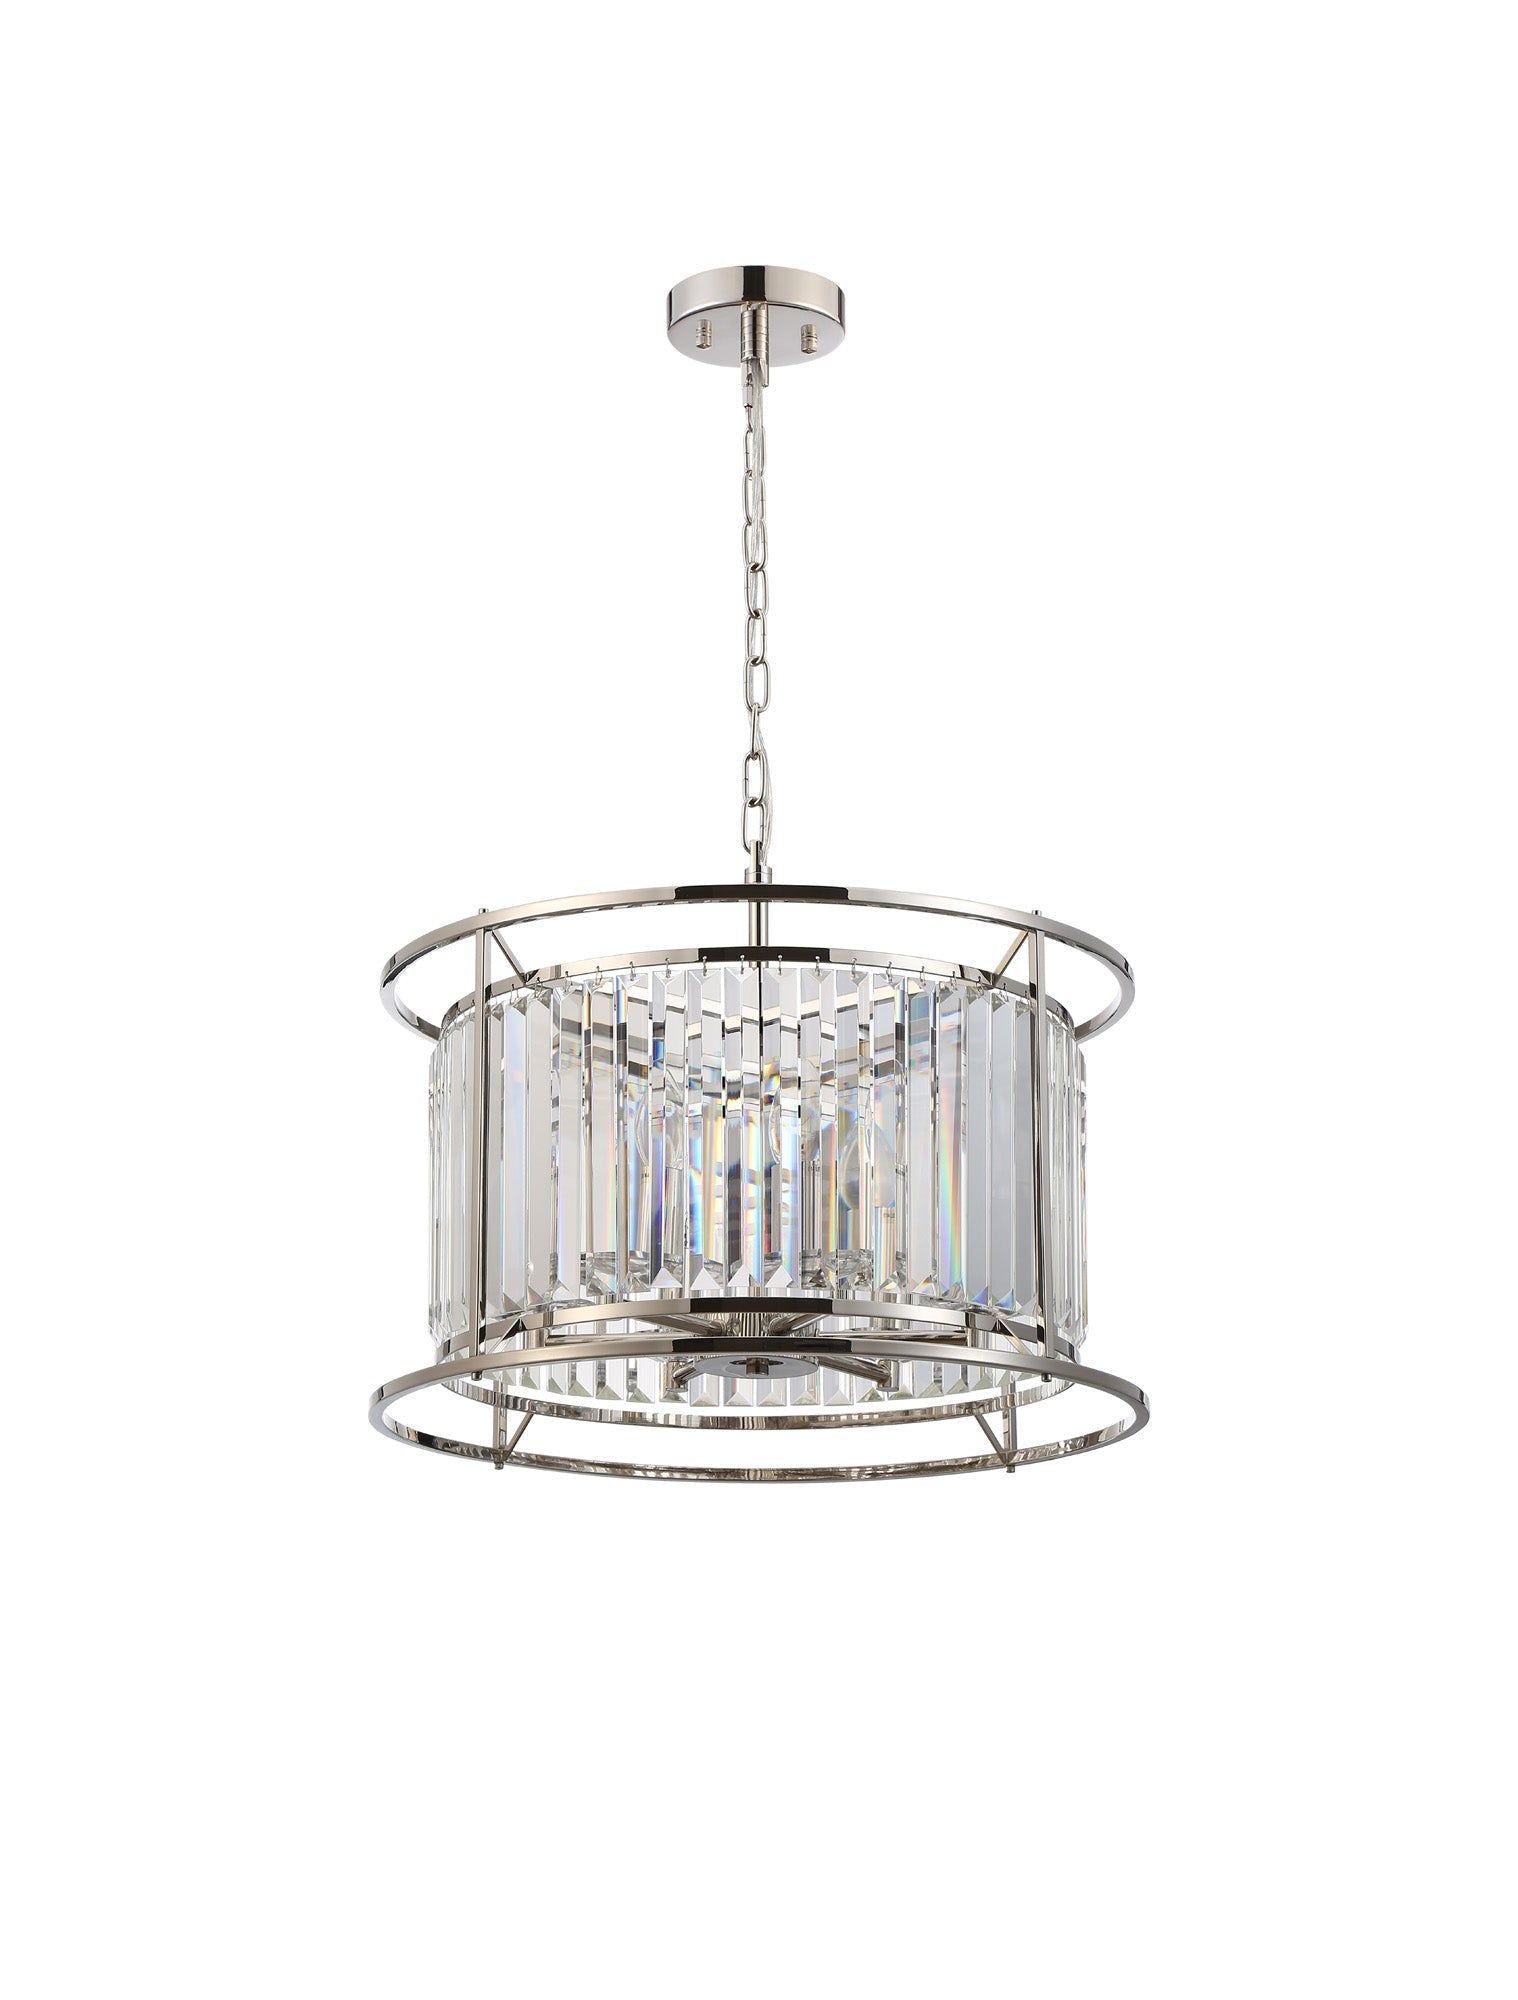 Belle Centre Ceiling Light/Semi Ceiling Convertible, 6Lt x E27 - Polished Nickel & Clear IP20